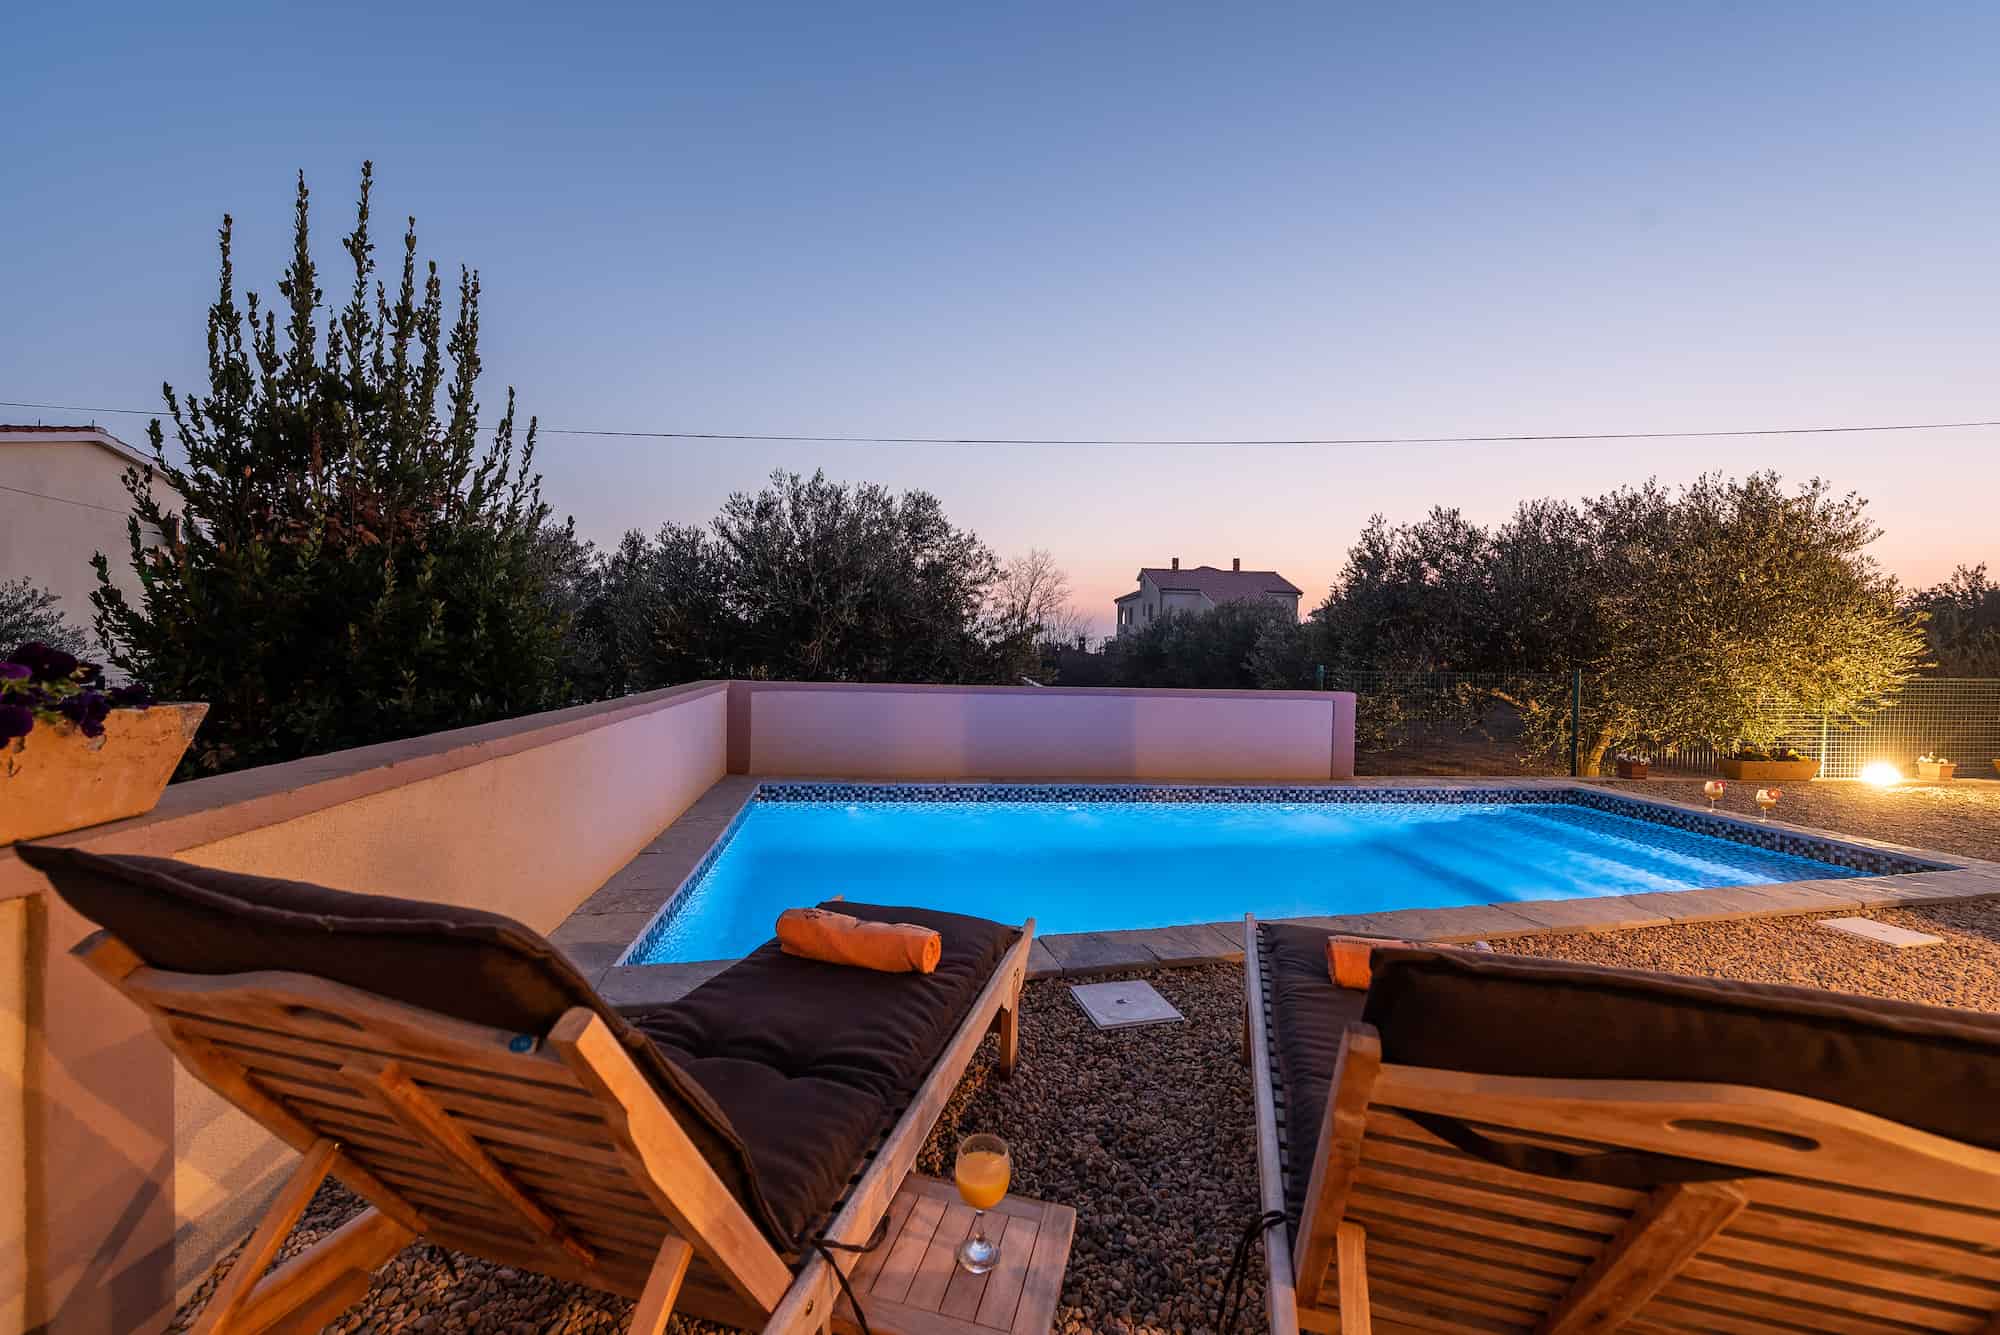 Holiday villa with pool in Croatia, night lighting of the pool and deck chairs